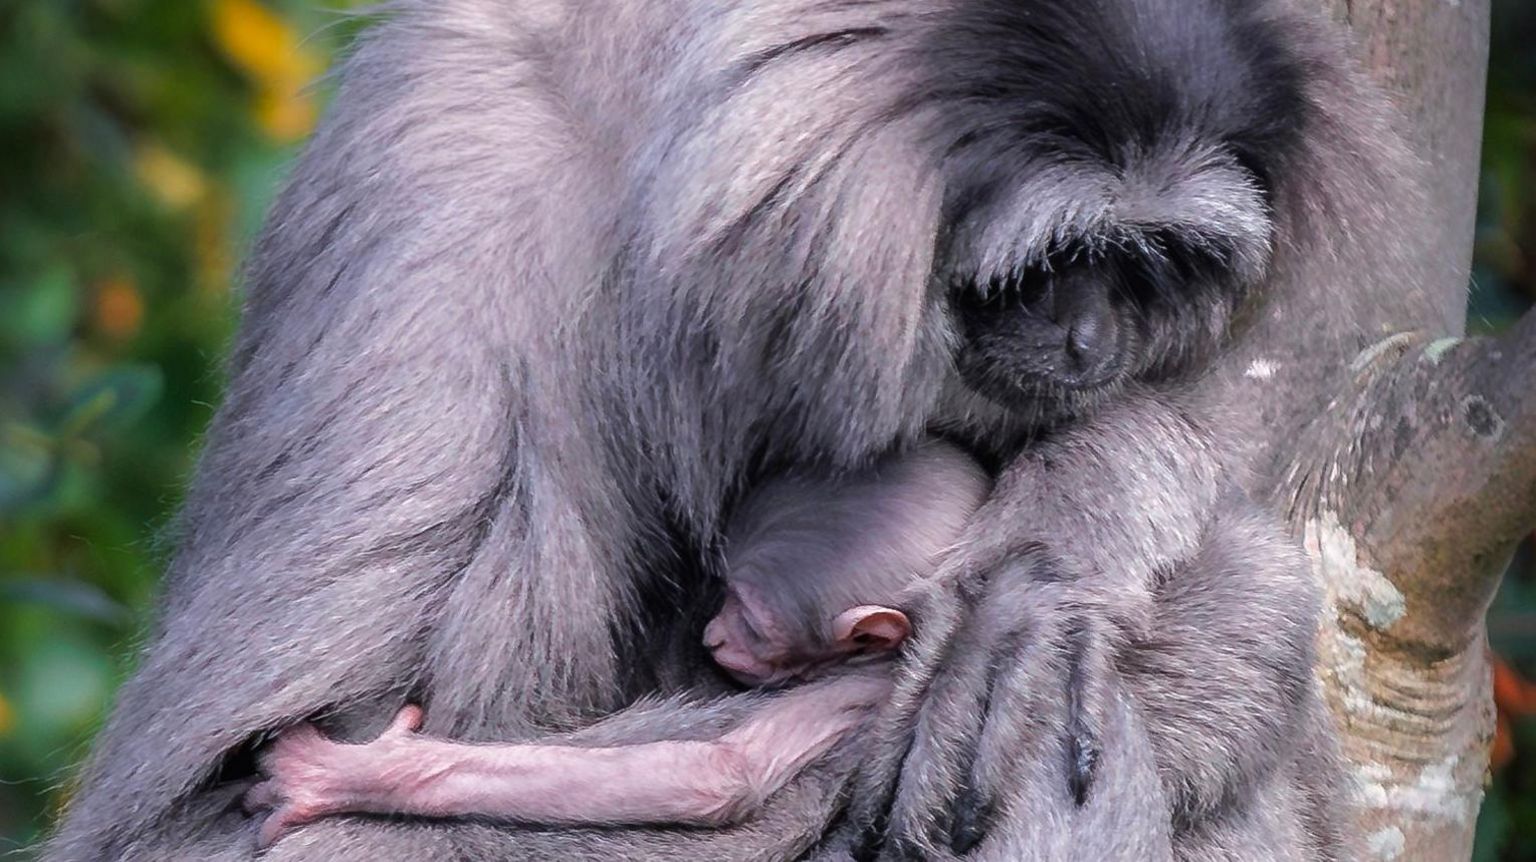 Baby silvery gibbon with its mother